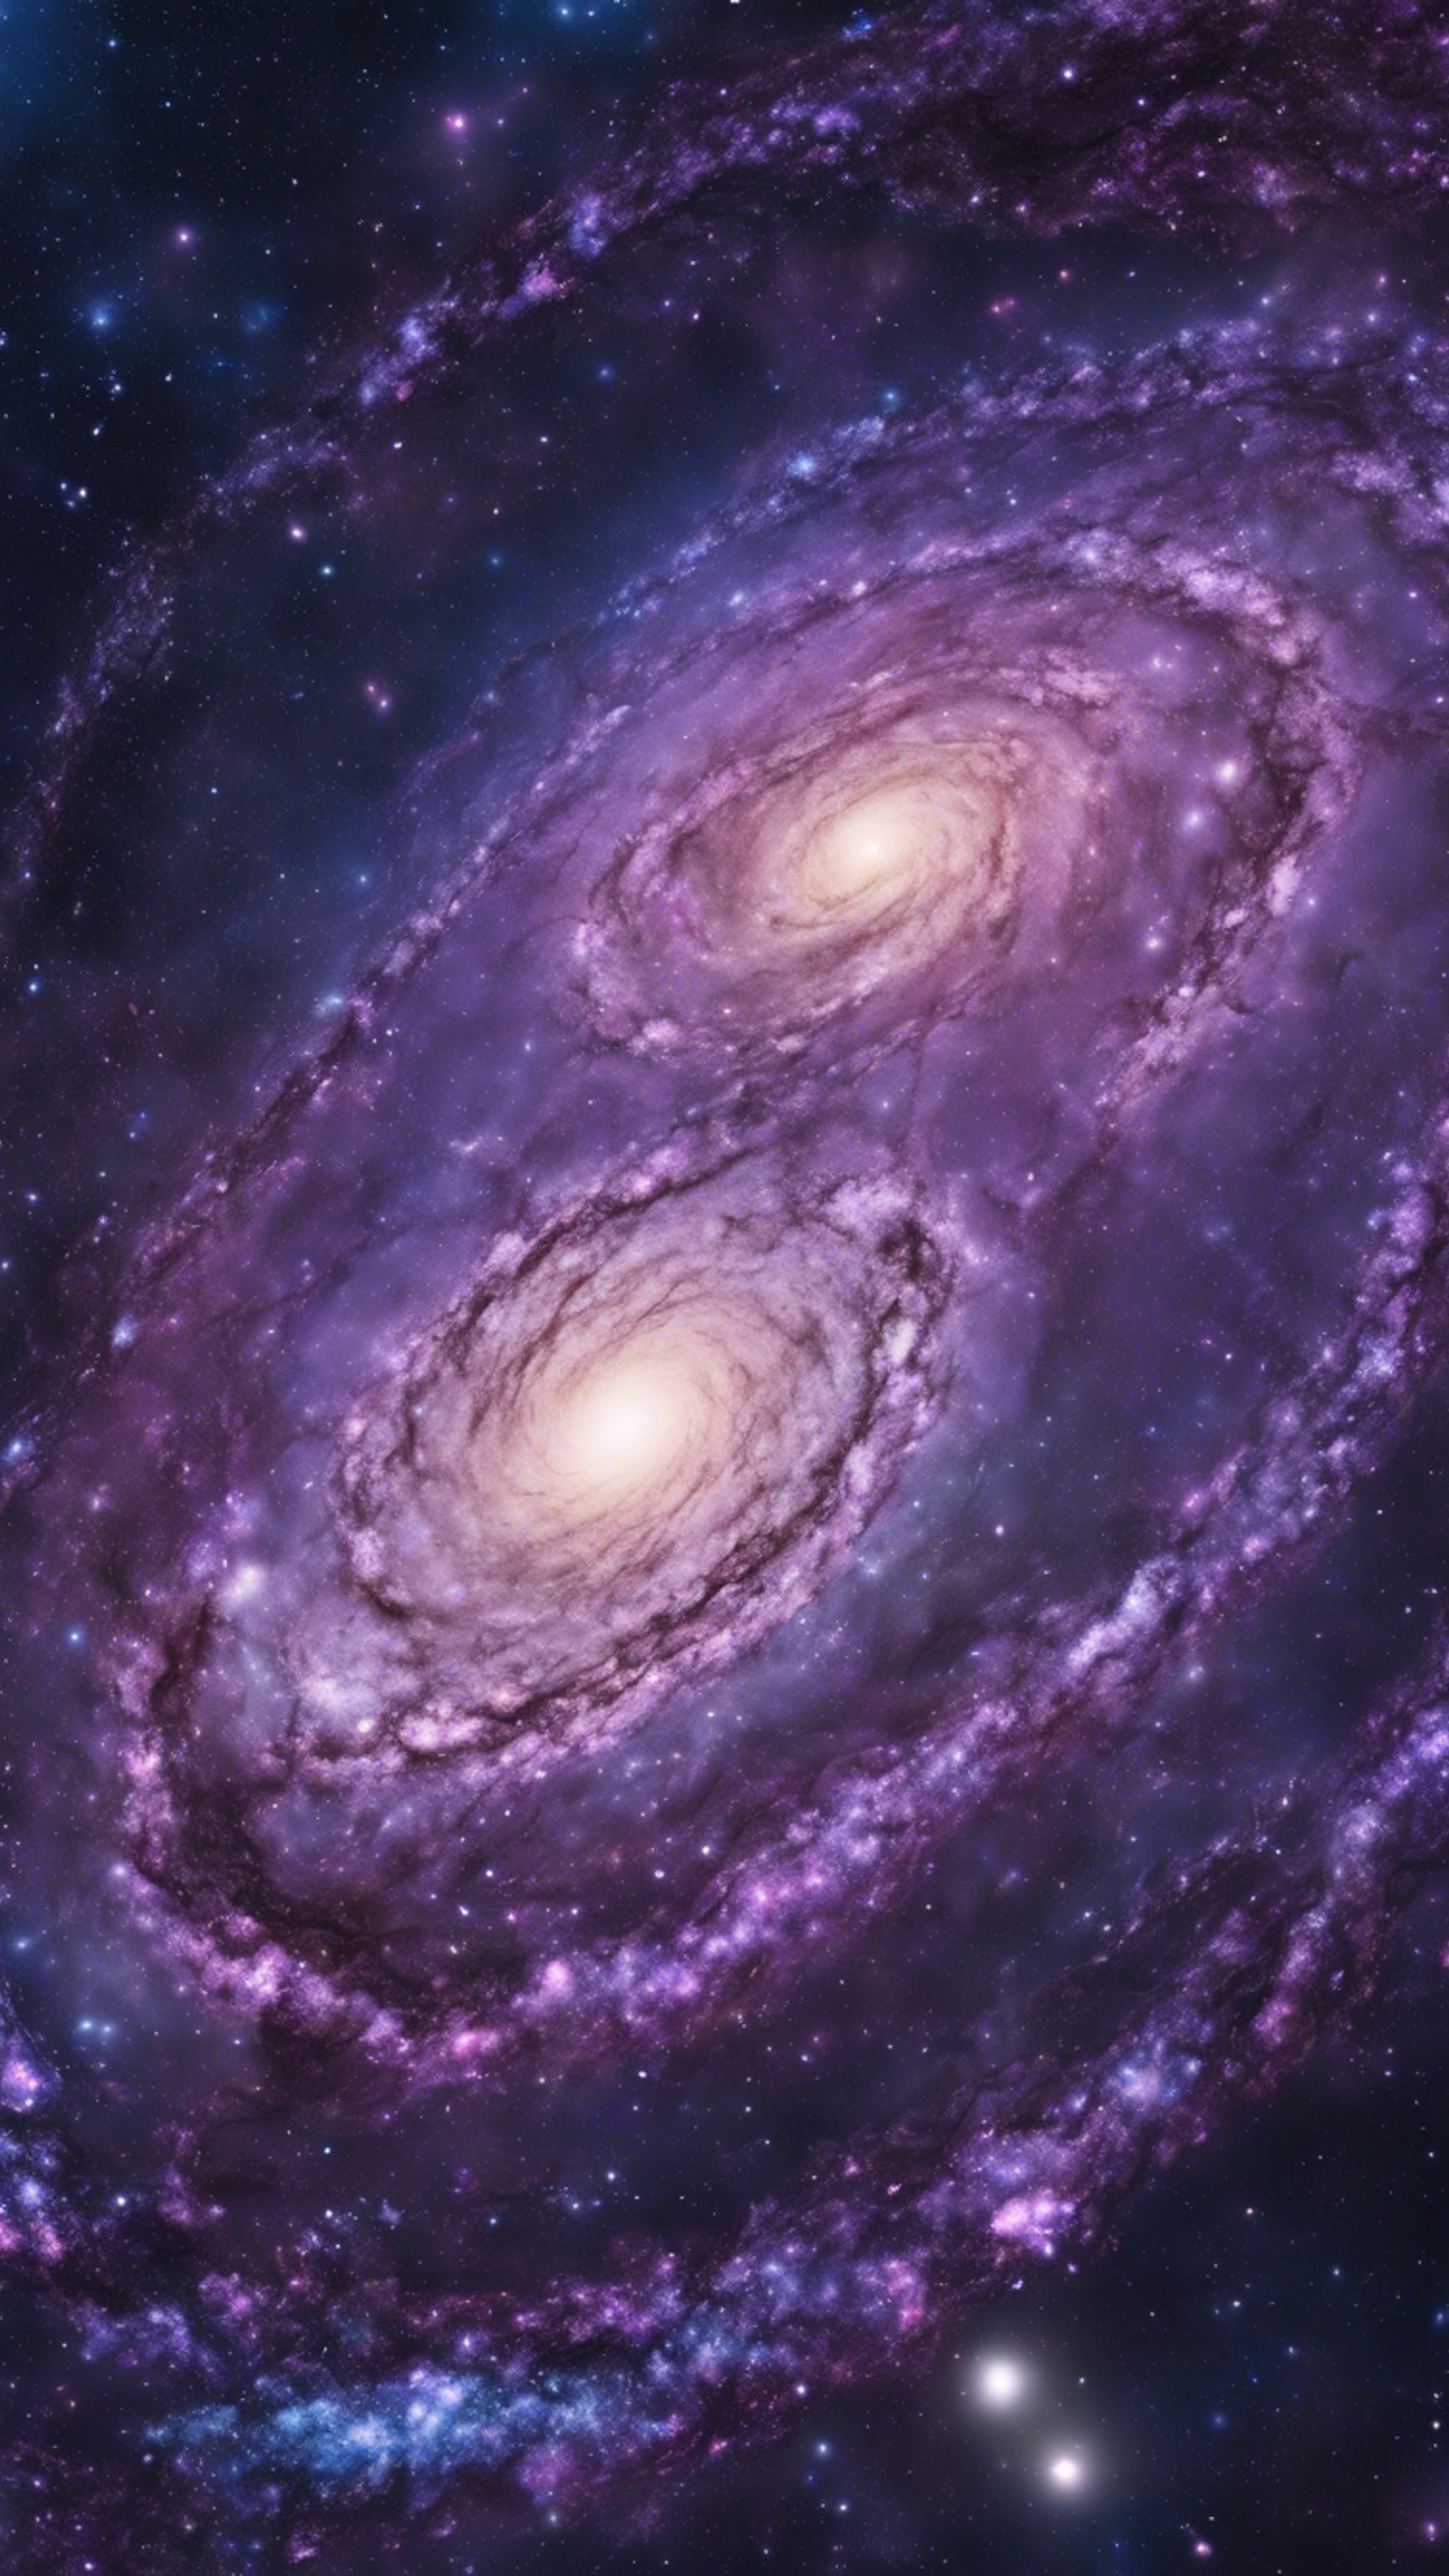 A spectacular galaxy with swirling patterns of purples and blues. ផ្ទាំង​រូបភាព[e57f5ee32b94469cbfb9]